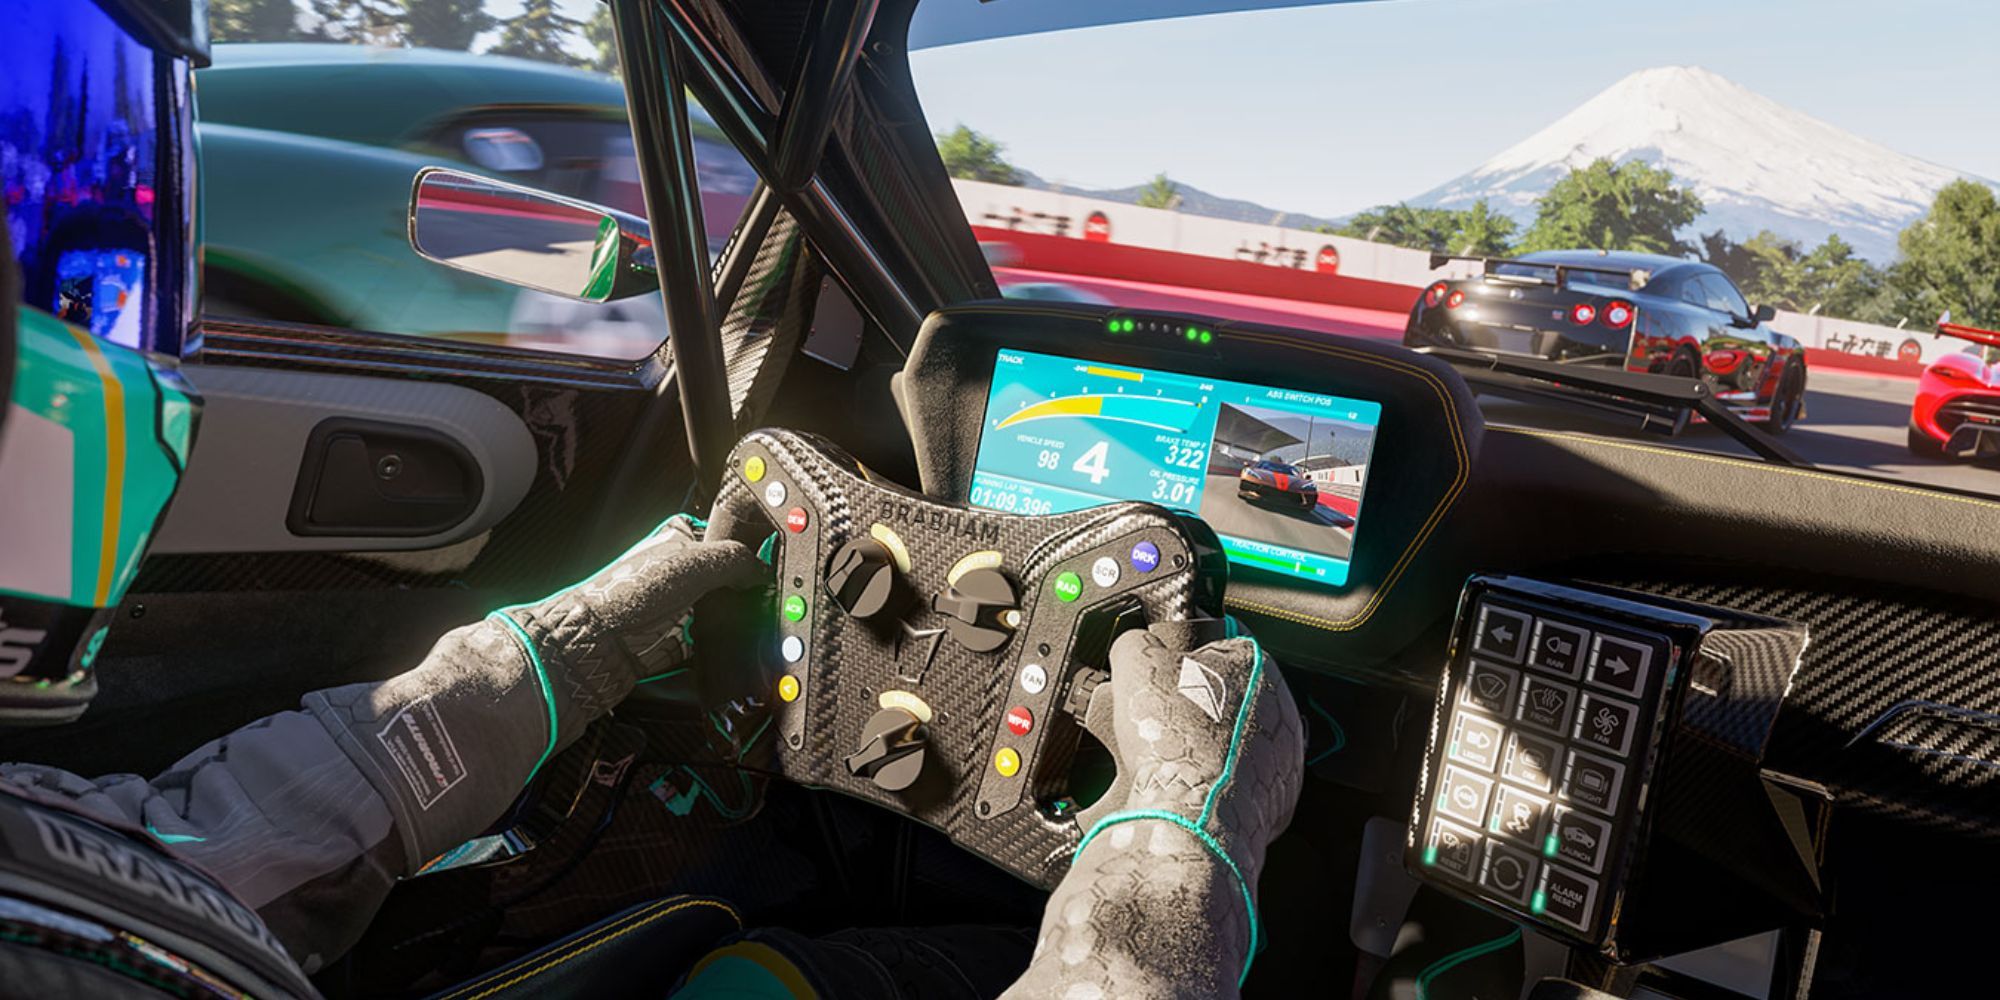 An inside view of a high-tech race car with the driver gripping an atypical steering wheel.